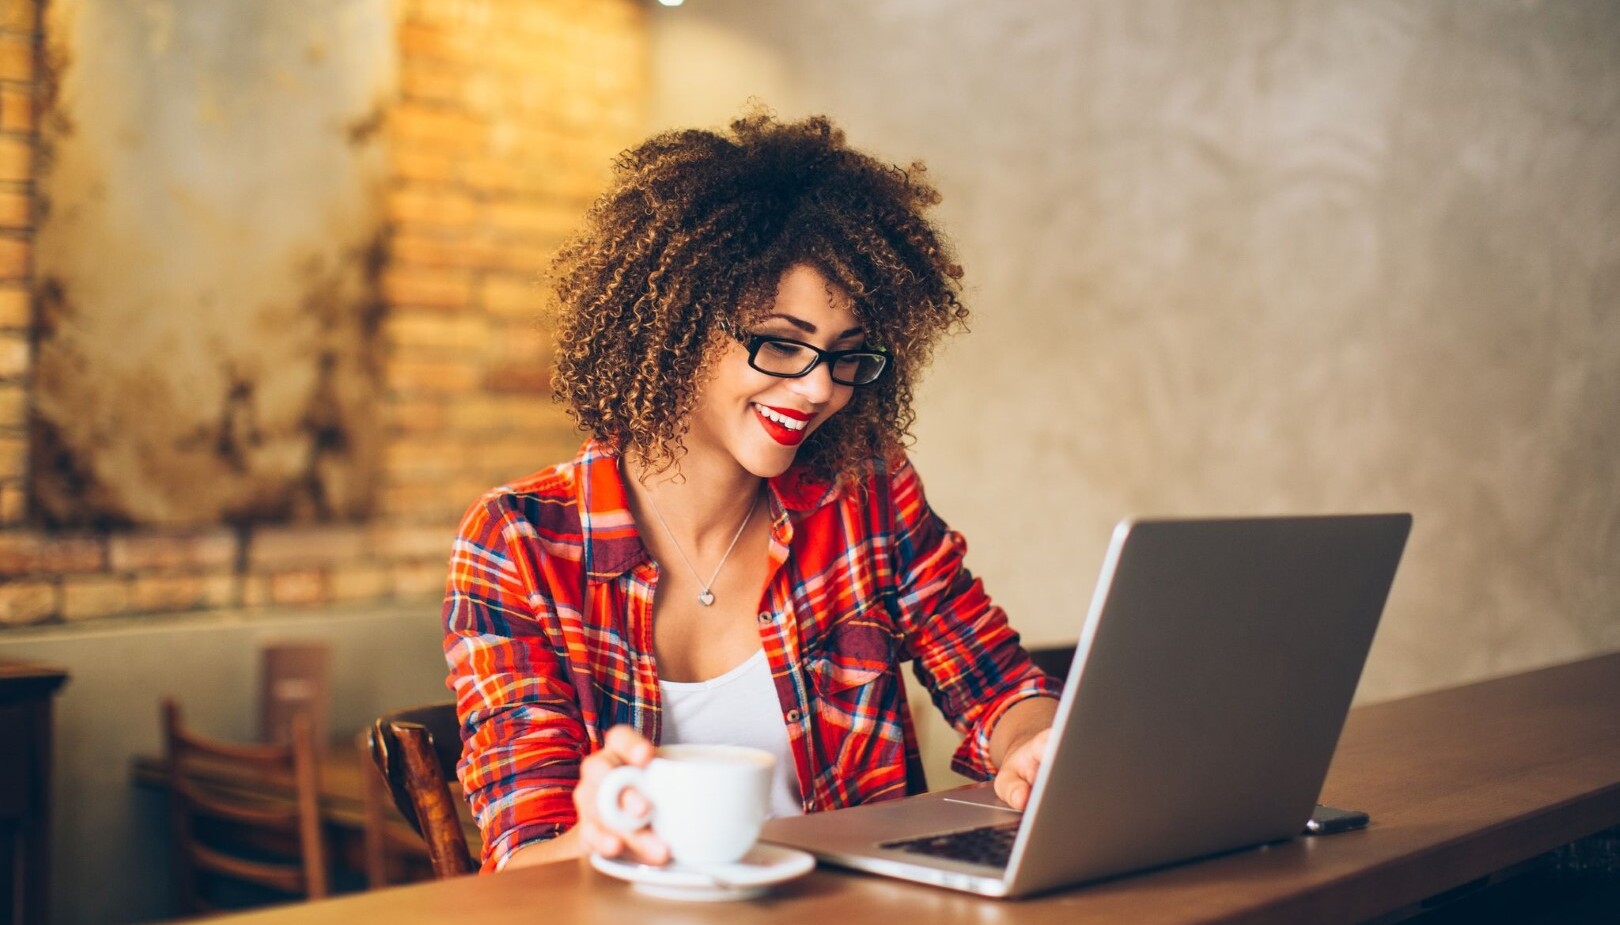 A woman with glasses and curly hair happily viewing her laptop with a cup of coffee